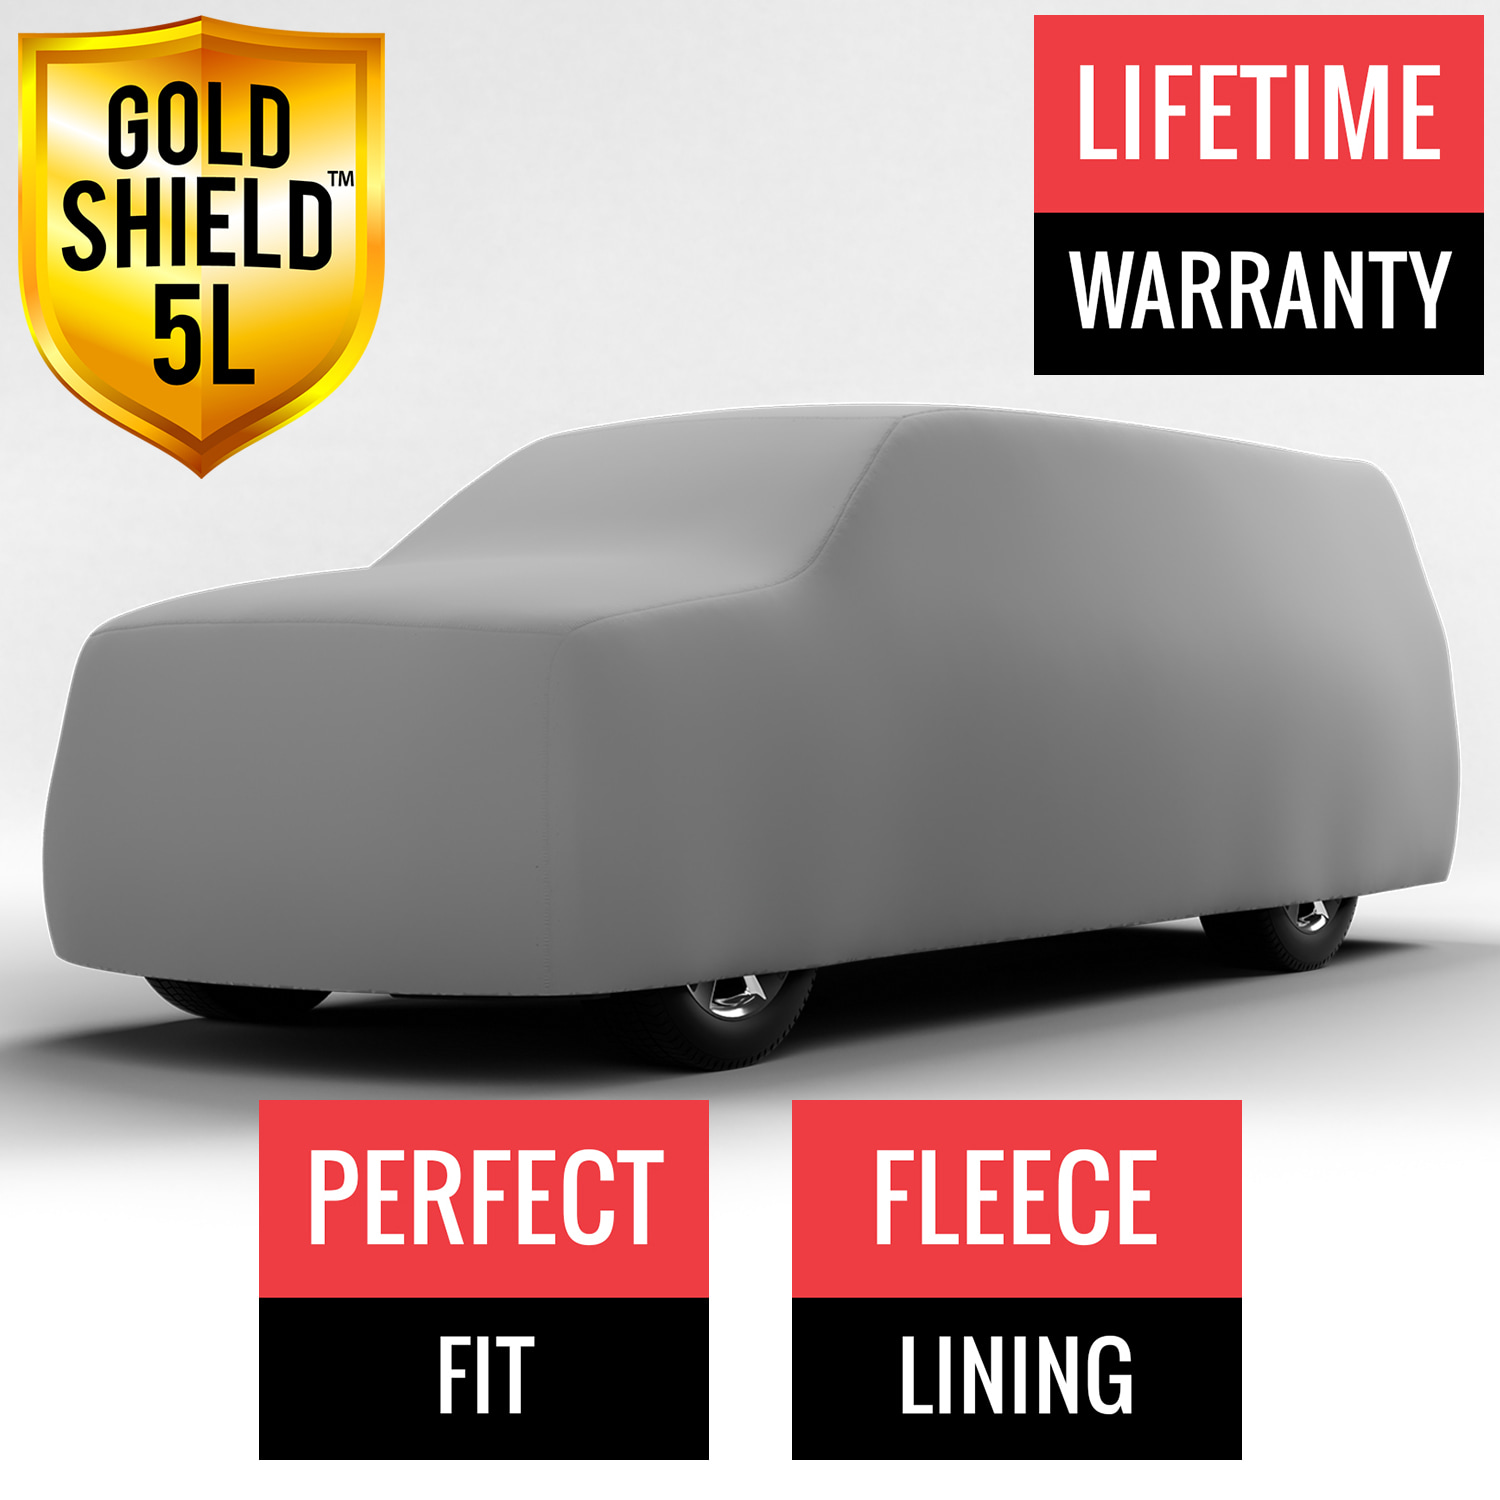 Gold Shield 5L - Car Cover for GMC C1500 1997 Extended Cab Pickup 6.5 Feet Bed with Camper Shell